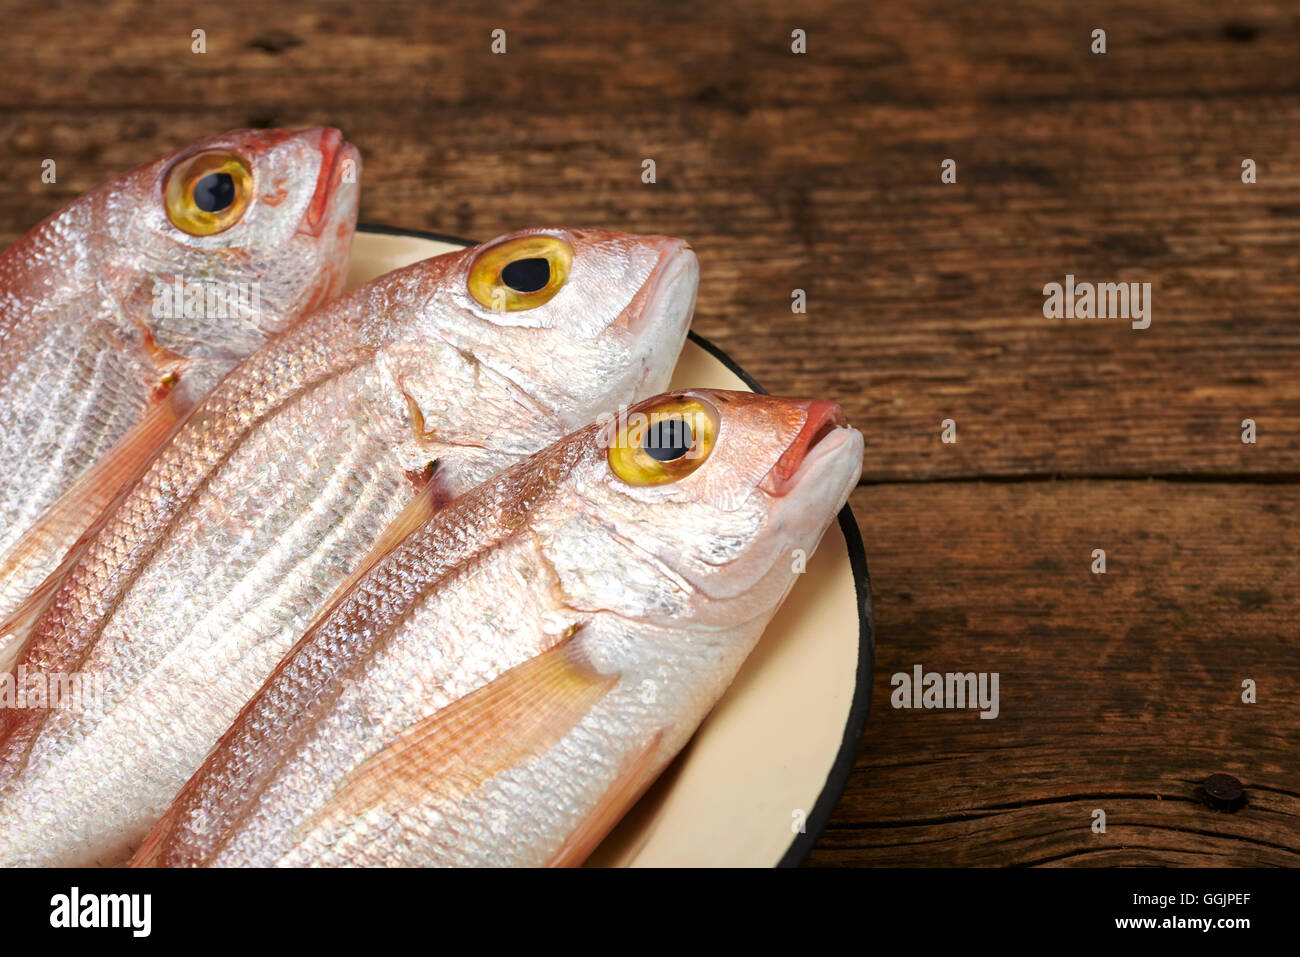 Fresh fish, red snapper in a plate Stock Photo